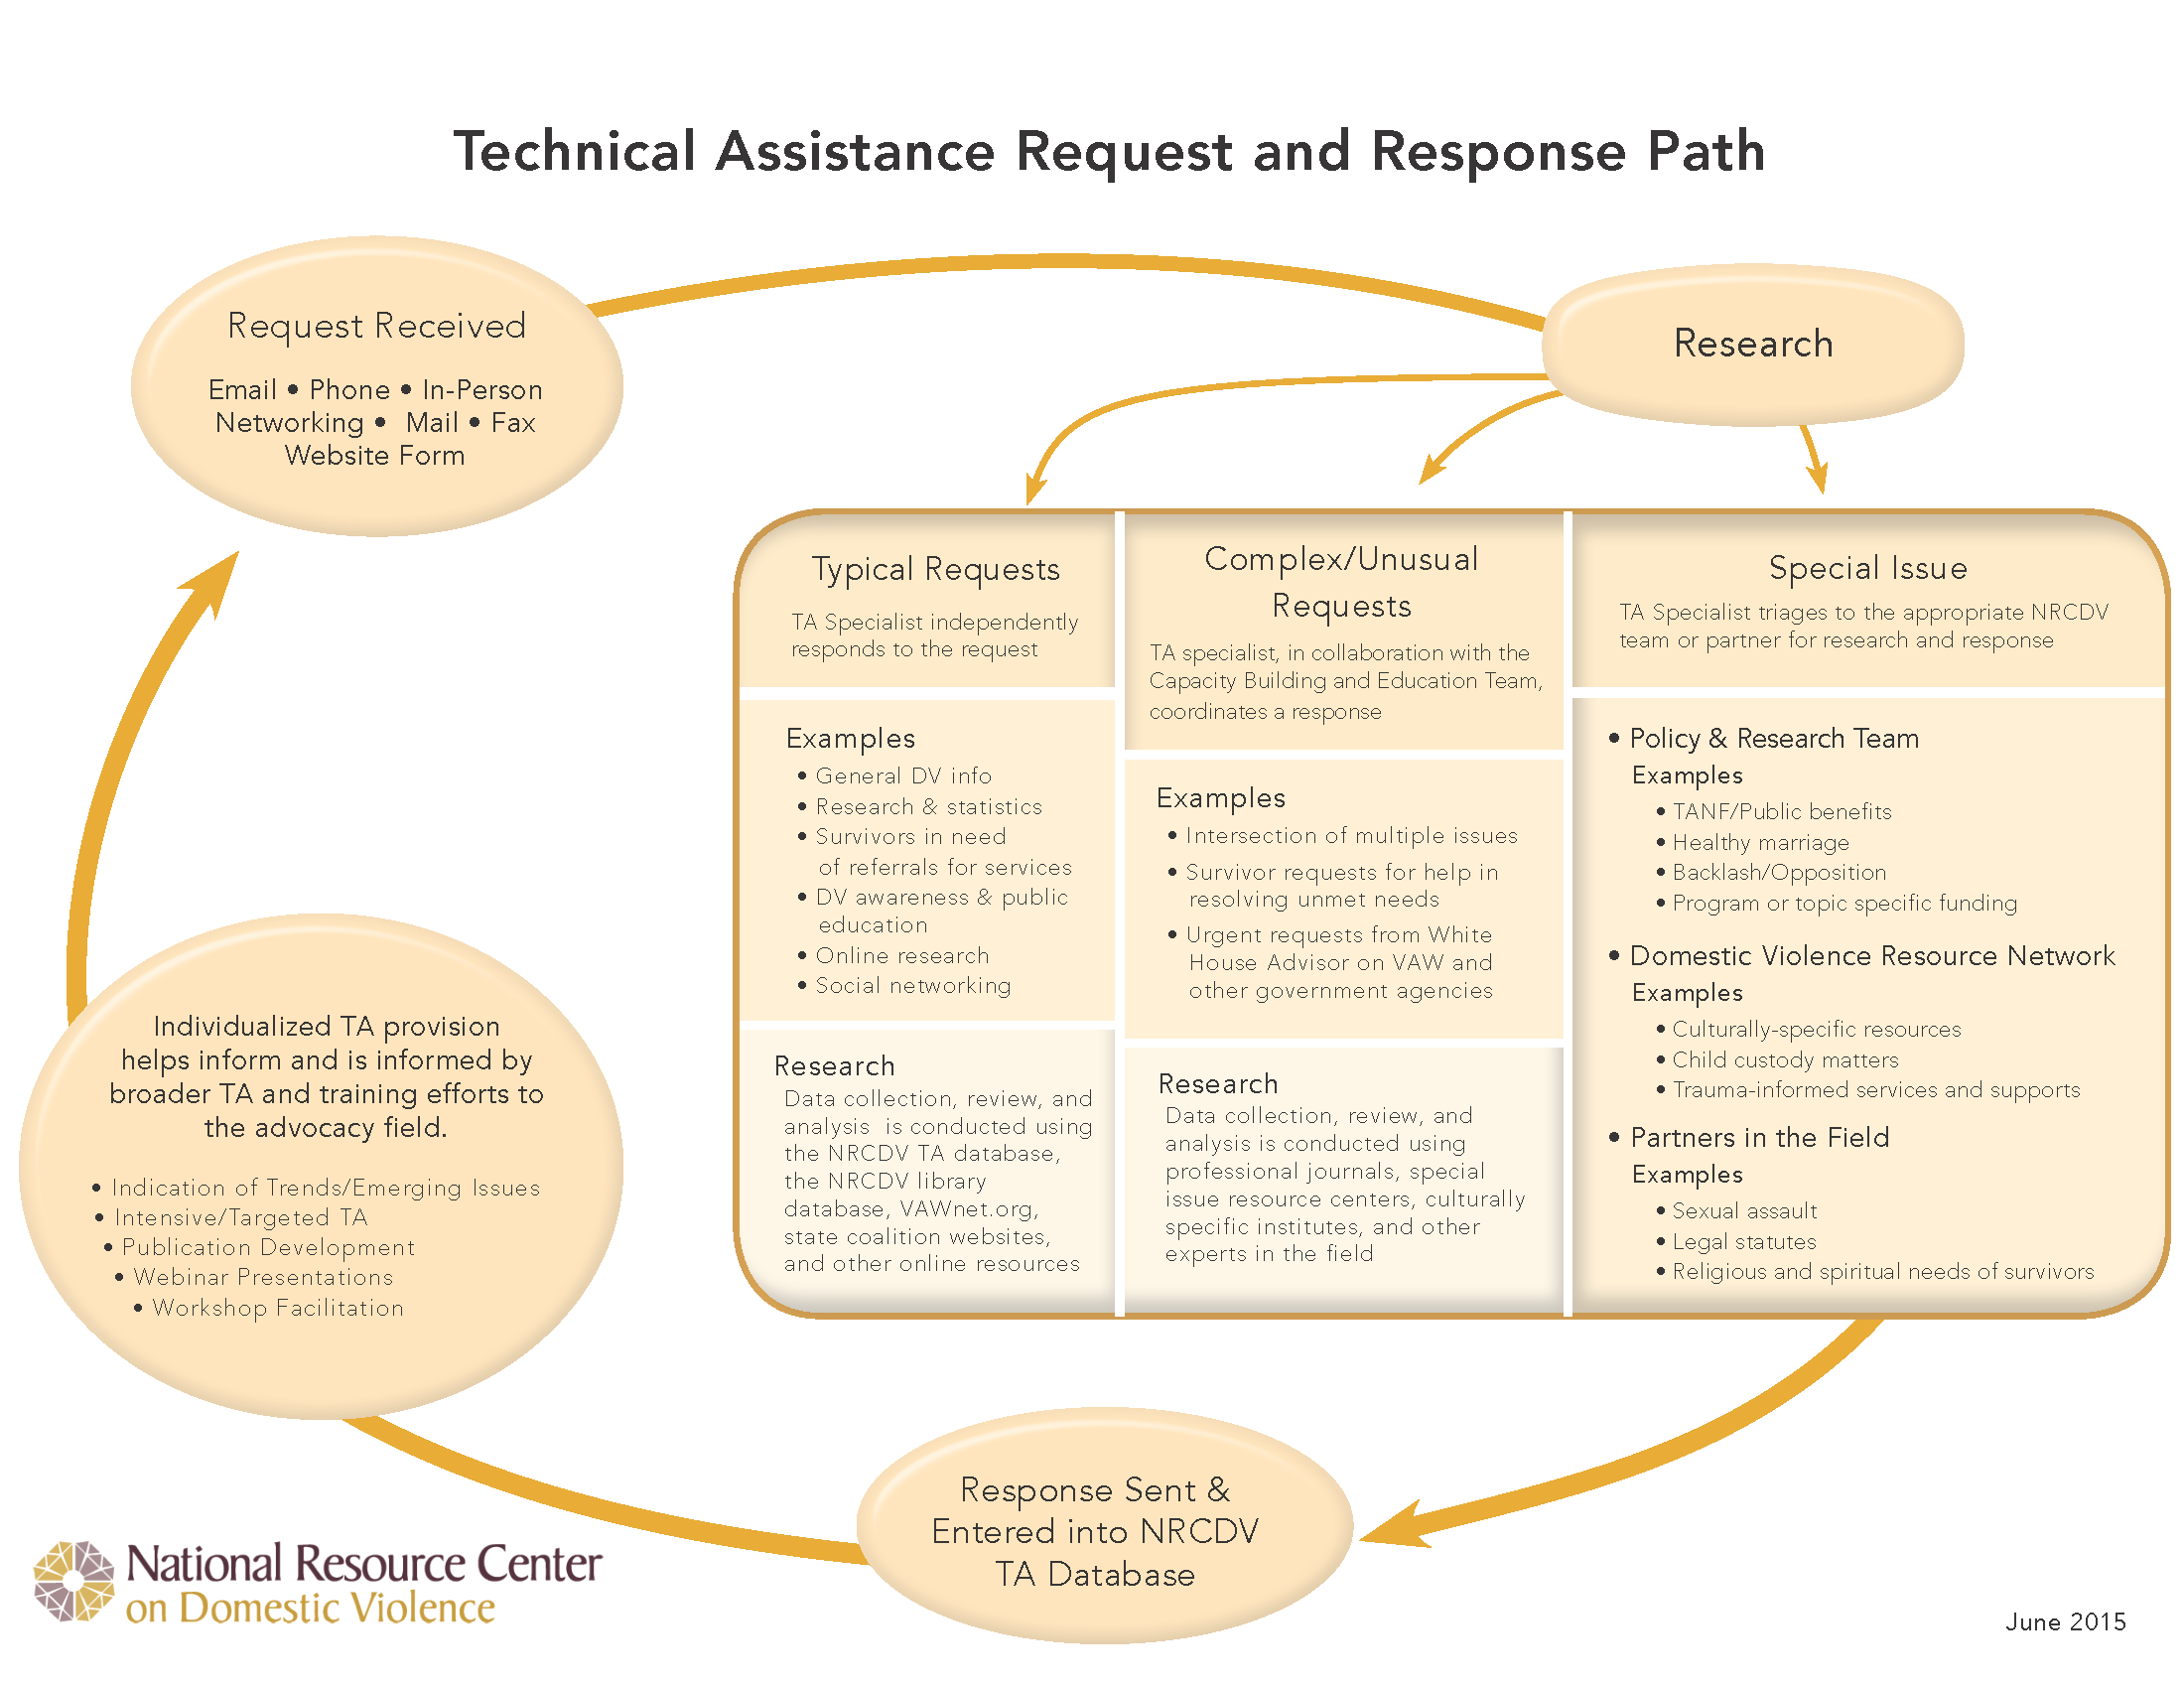 A chart using ovals and arrows to demonstrate the flow of information and response for technical assistance from NRCDV.